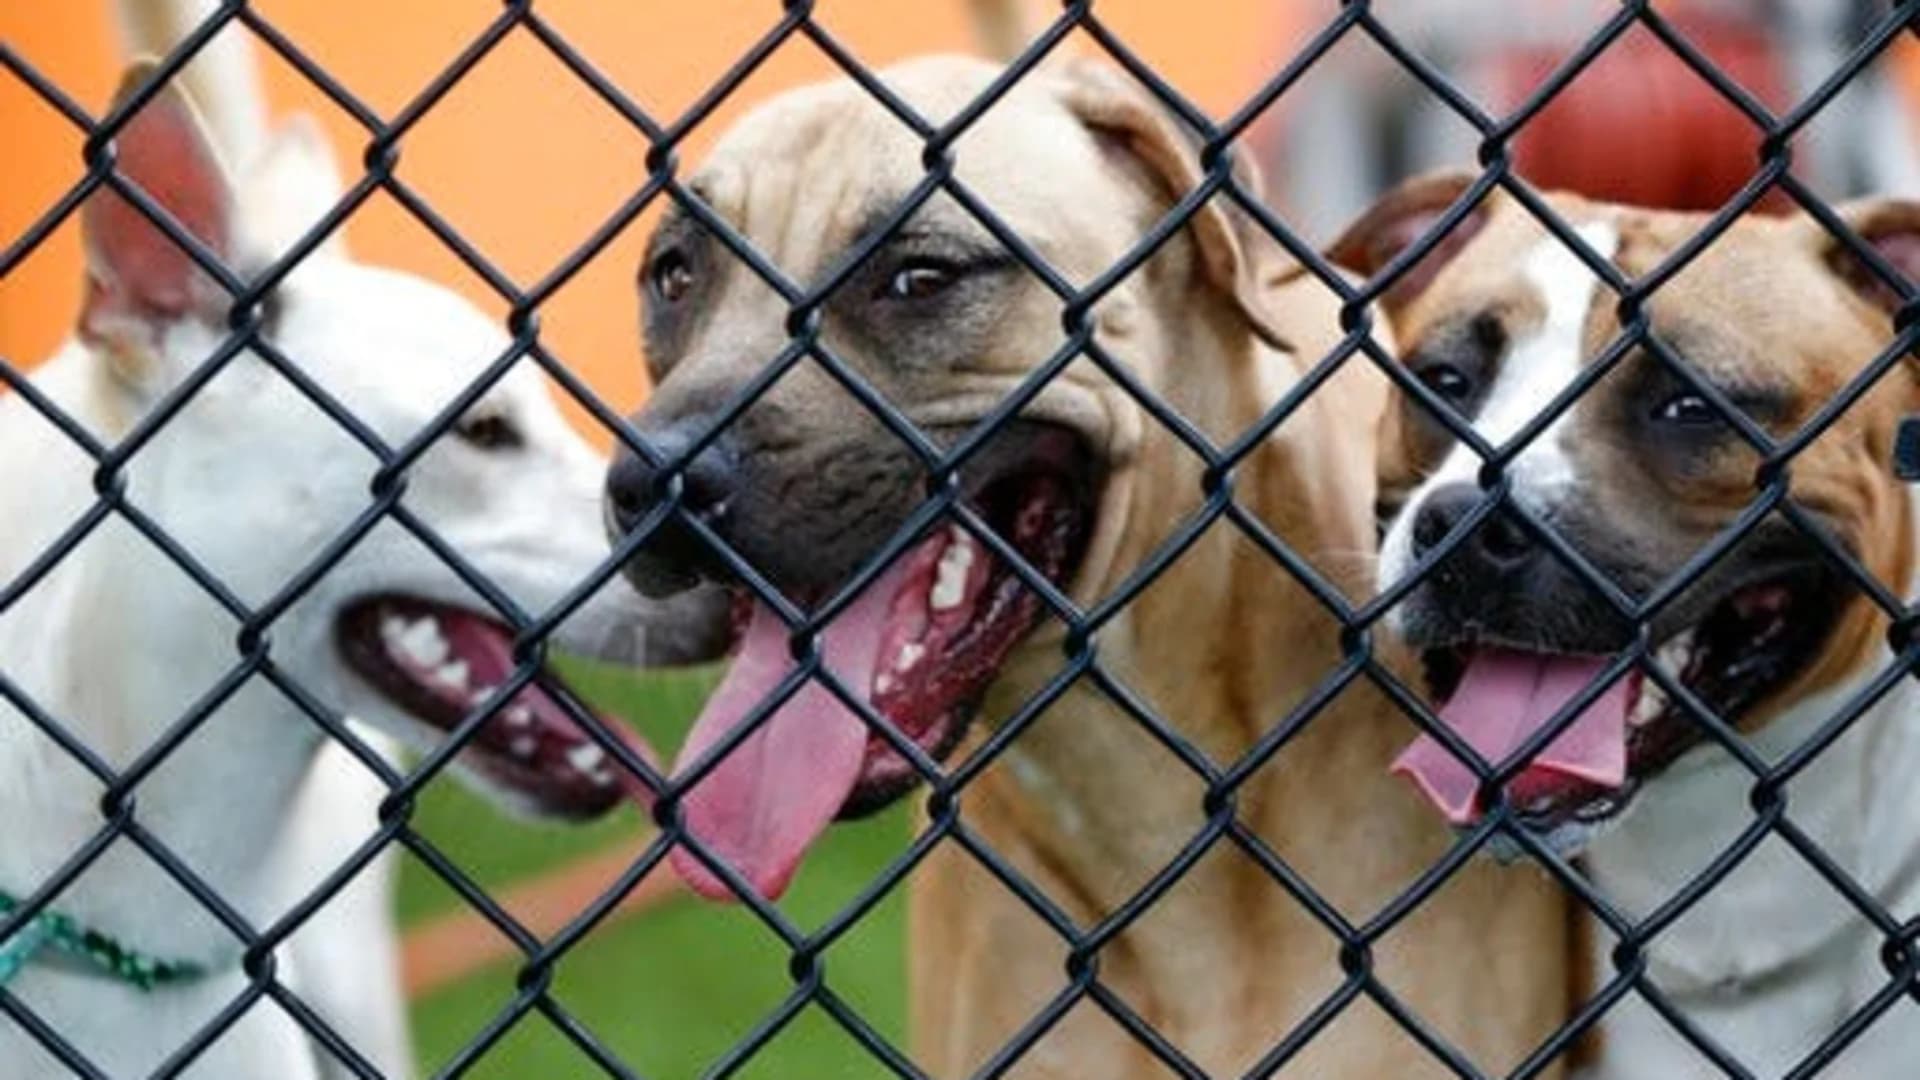 Are you ready to adopt a shelter pet? Consider these tips